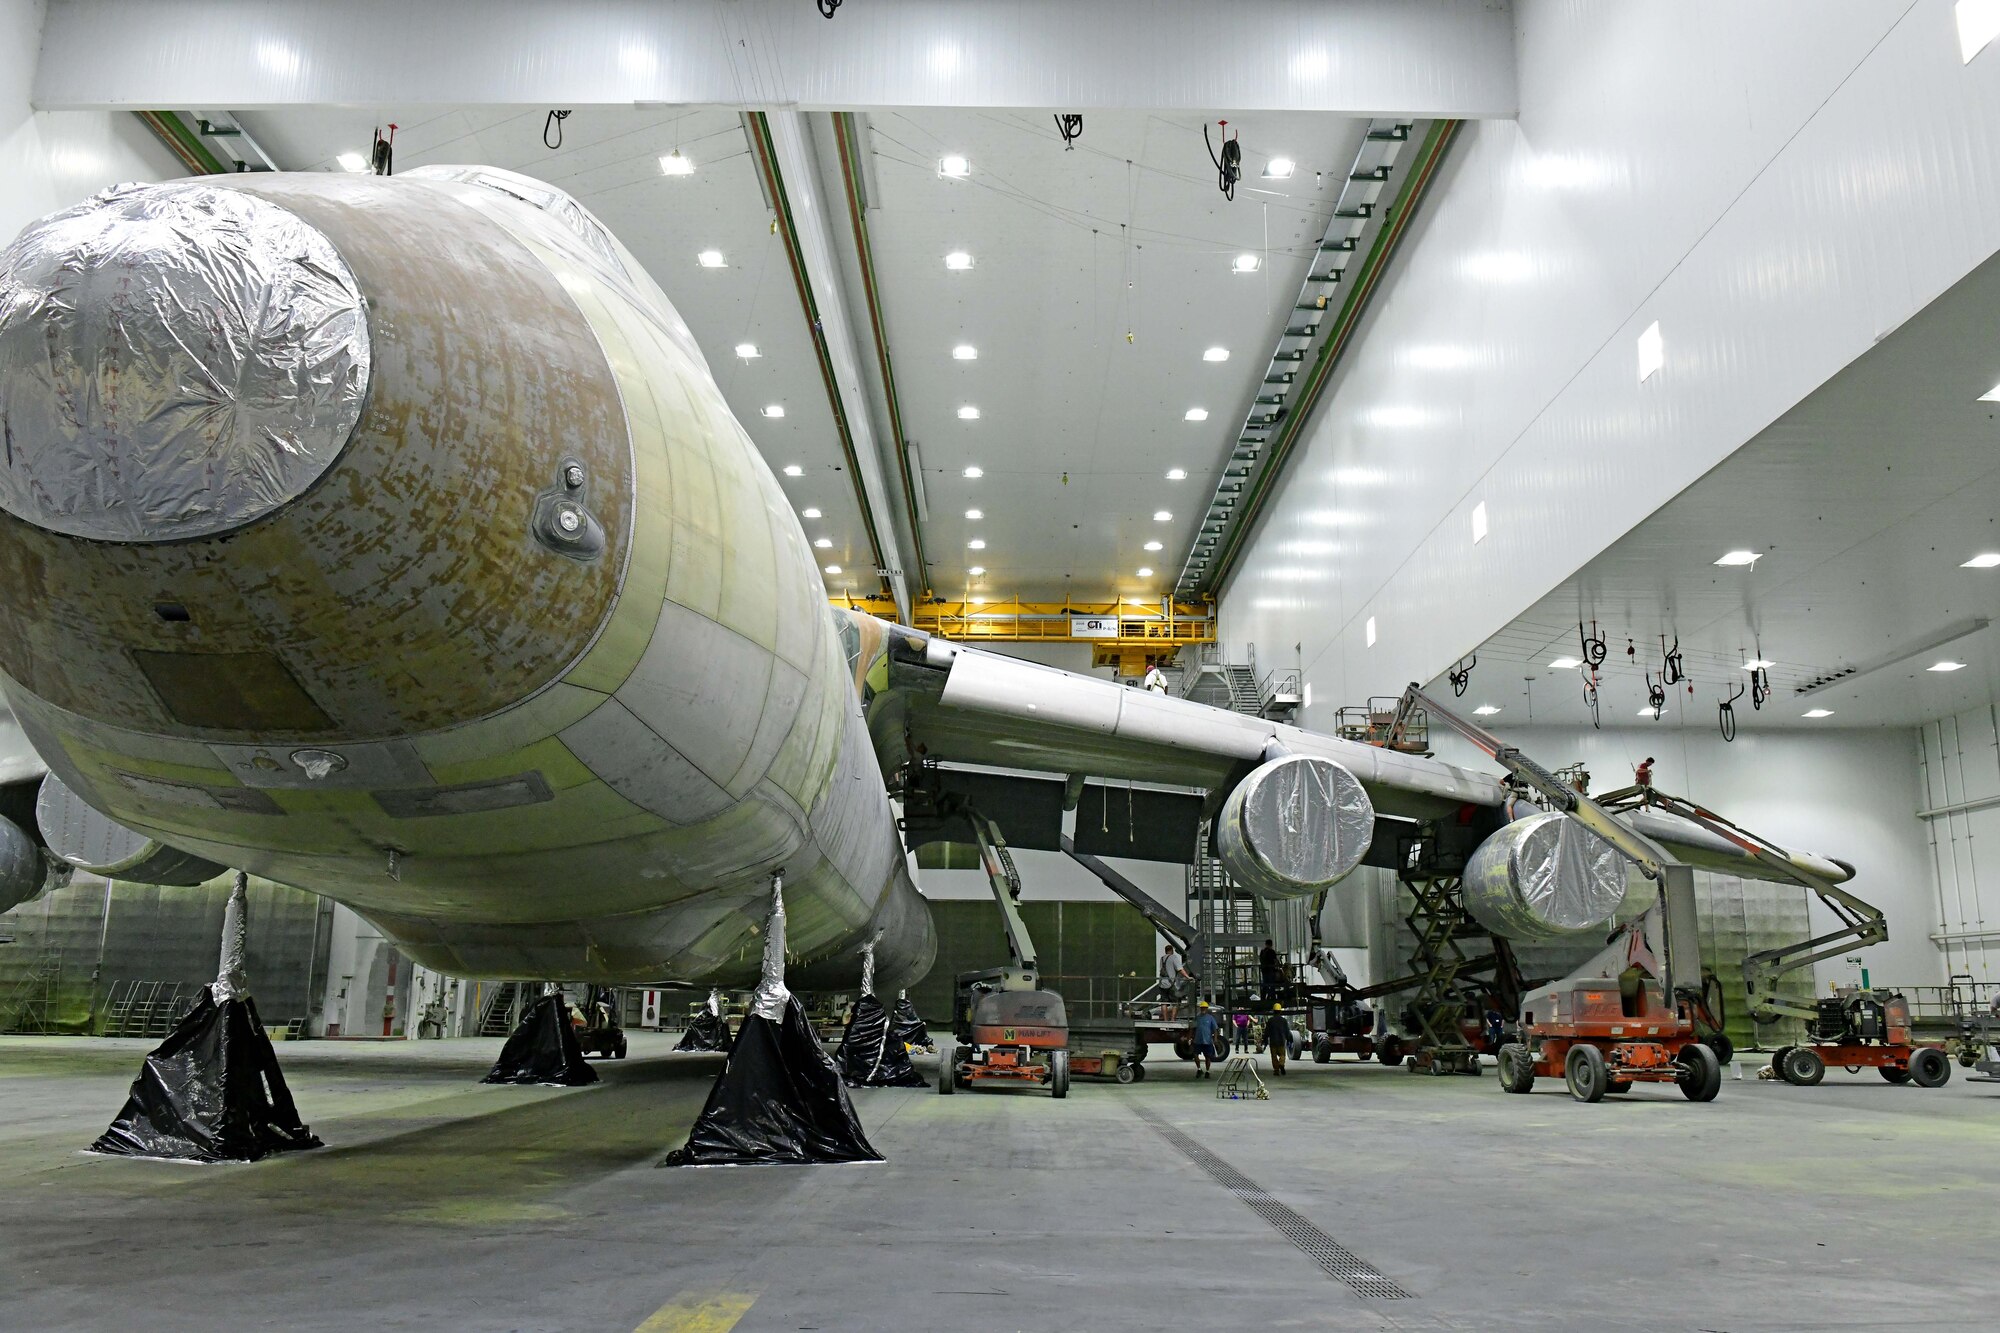 painters preparing aircraft for painting